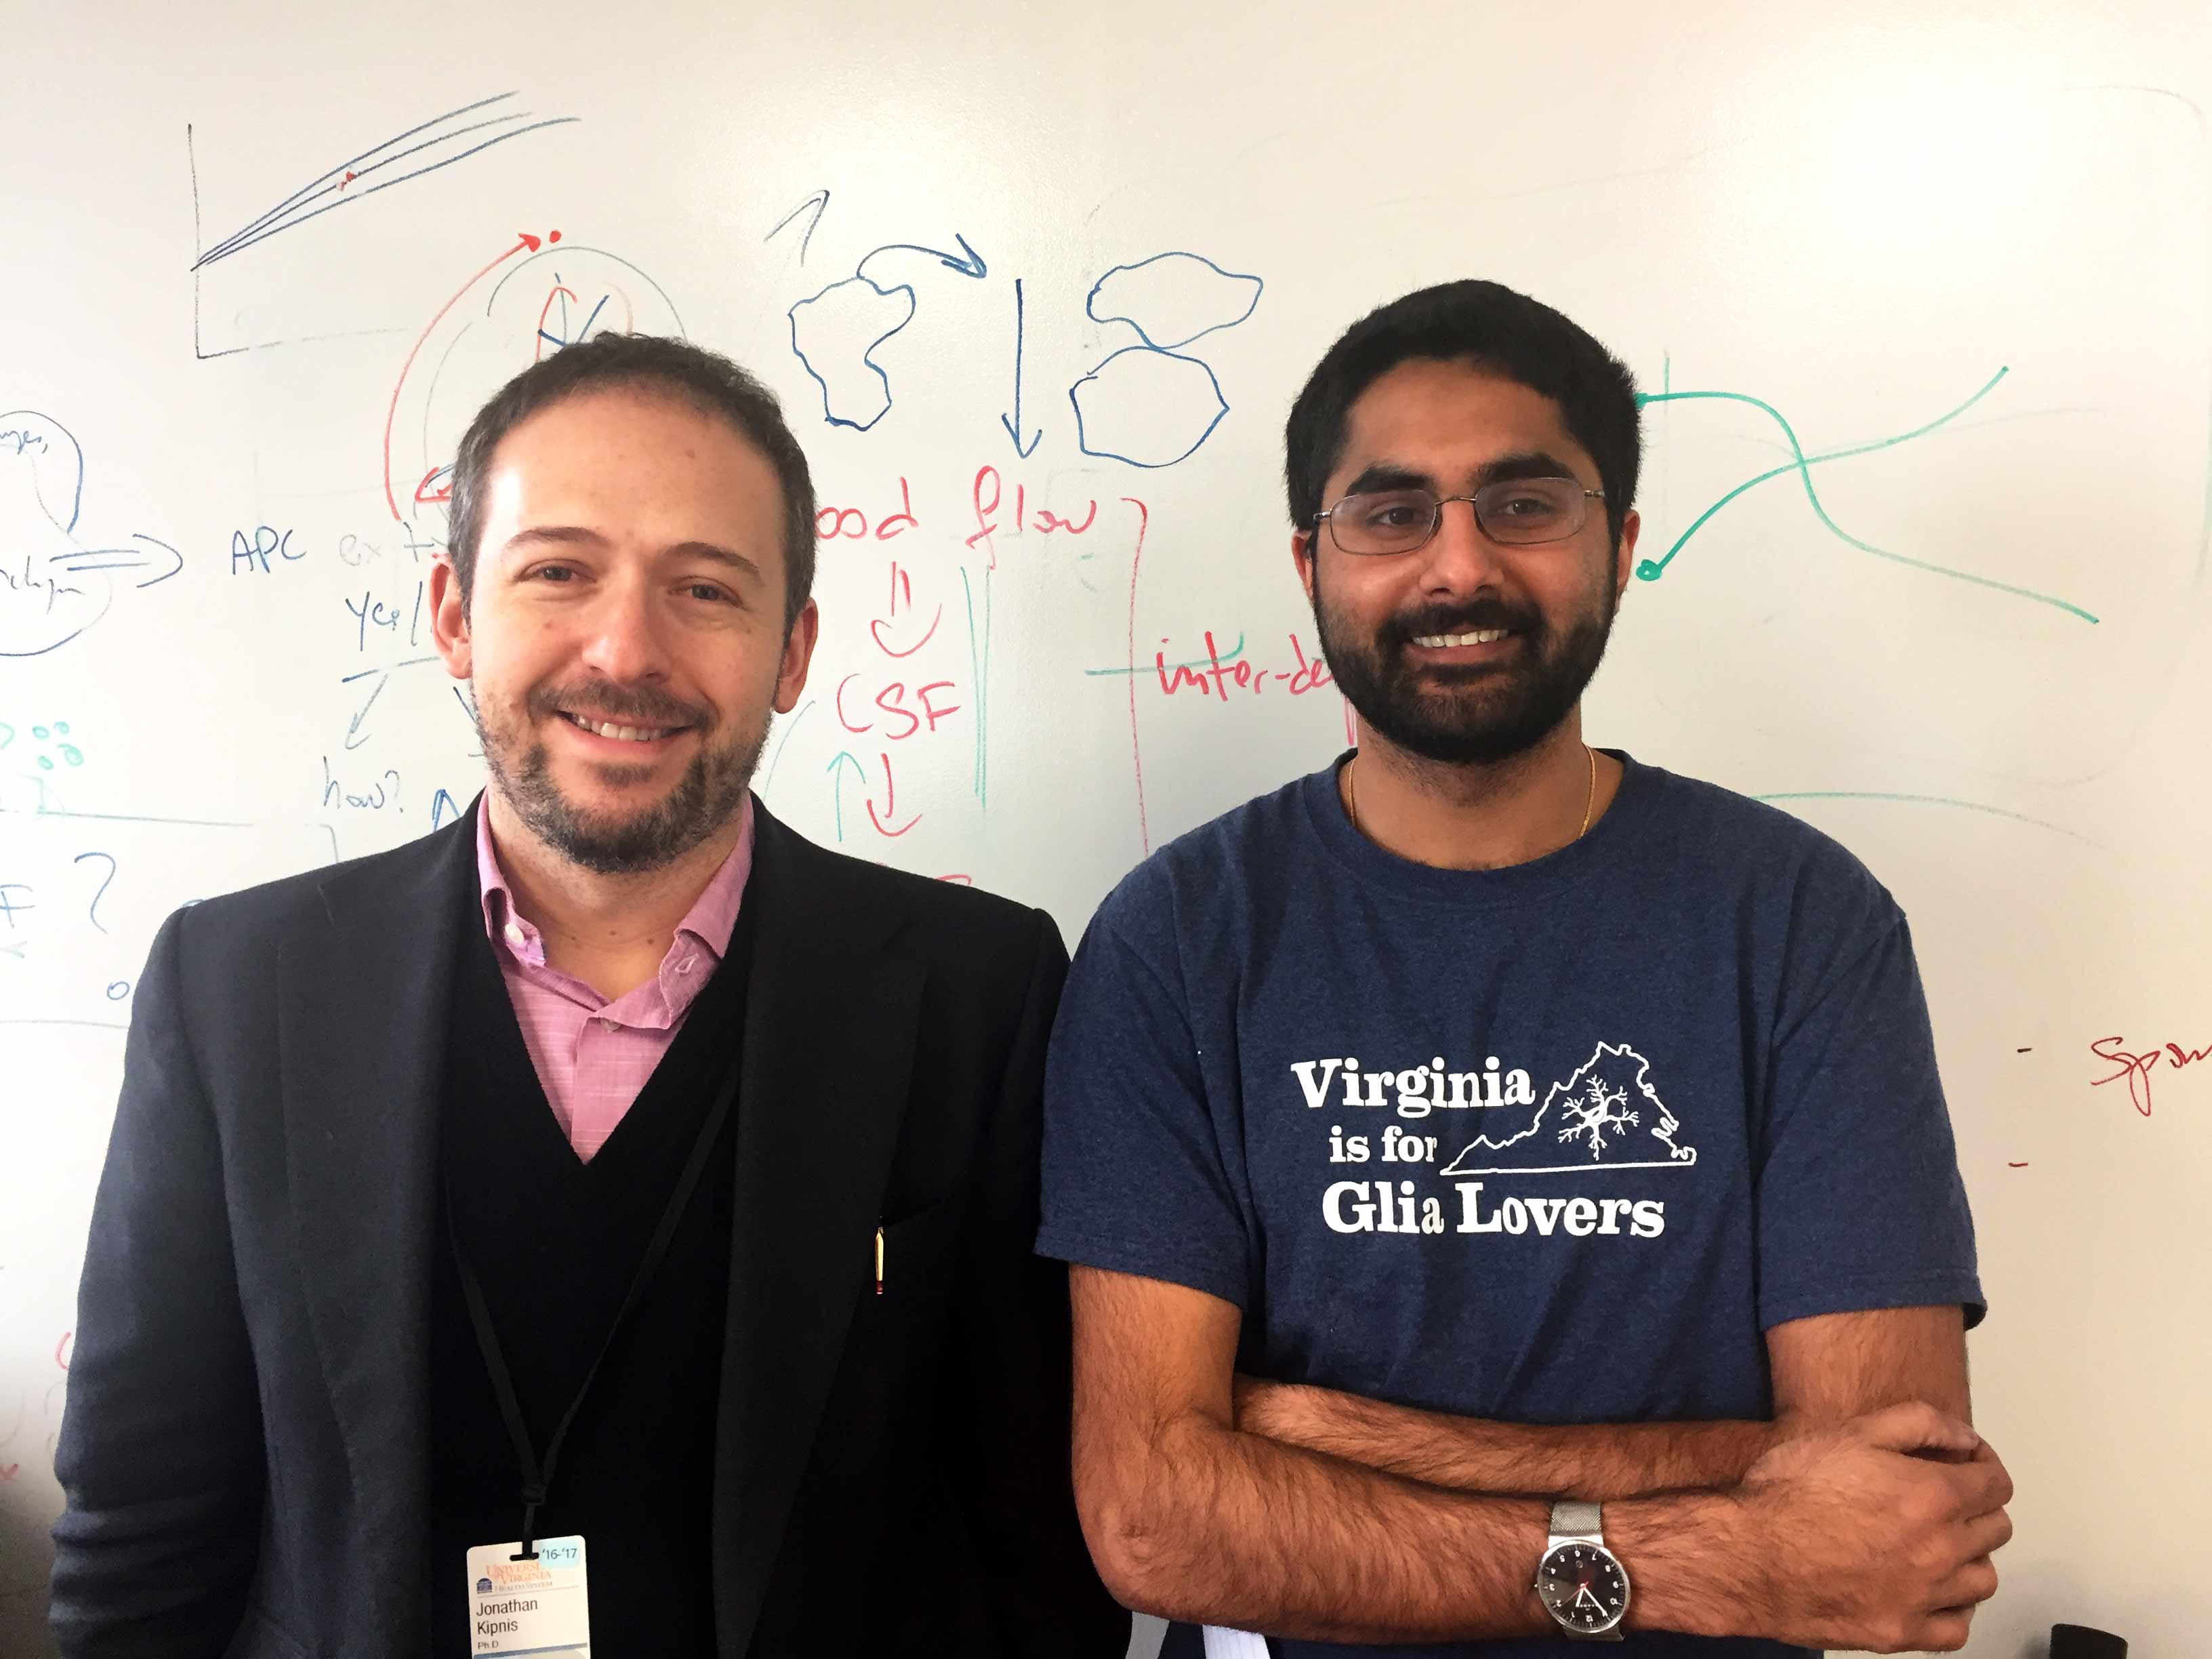 The finding builds on previous work by the lab of Jonathan Kipnis, left, with researcher Sachin Gadani, that found an unexpected link between the brain and the immune system.